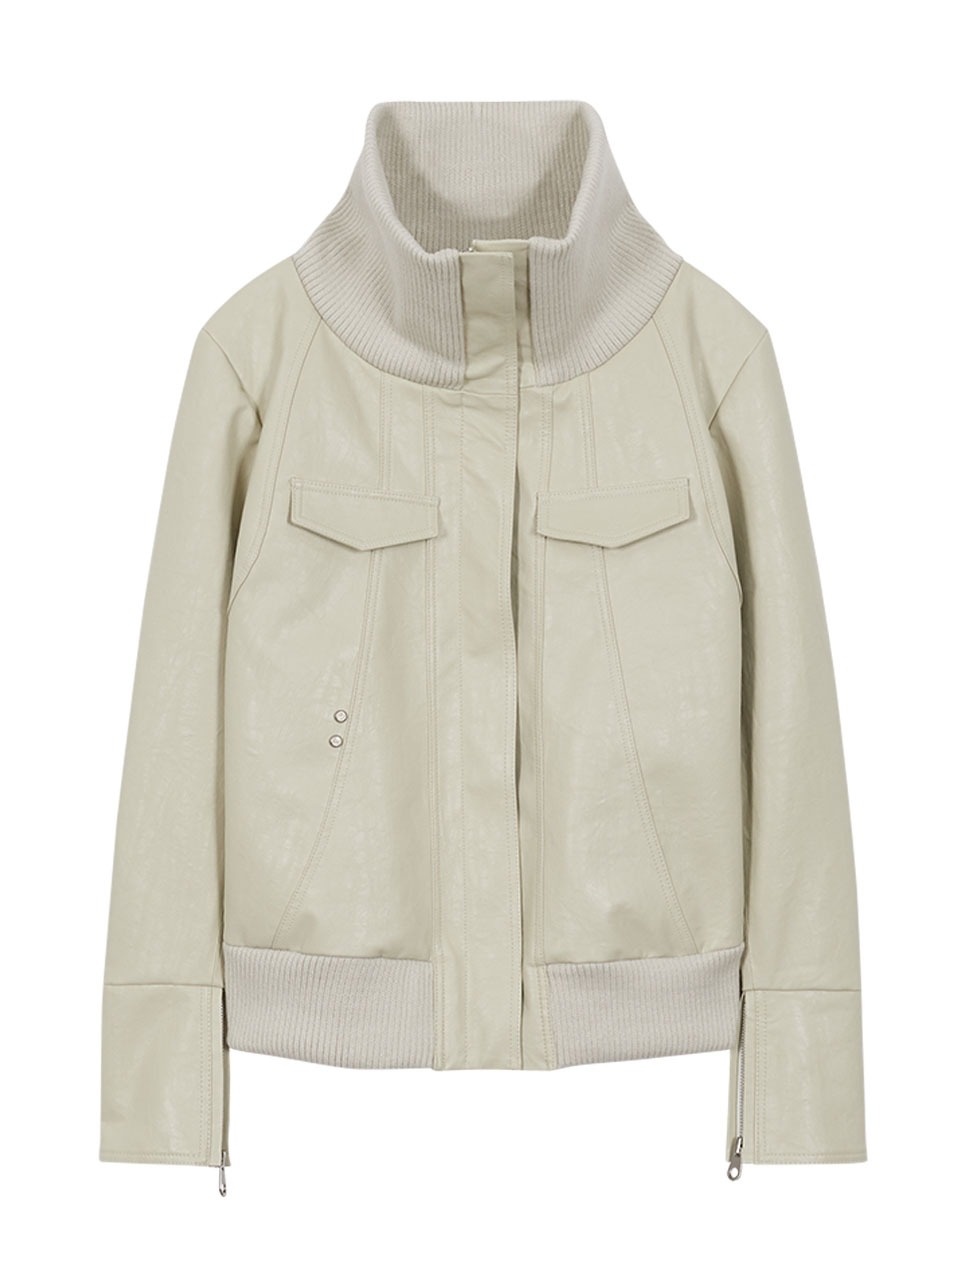 HIGH NECK LINE FAUX LEATHER JACKET_CREAM